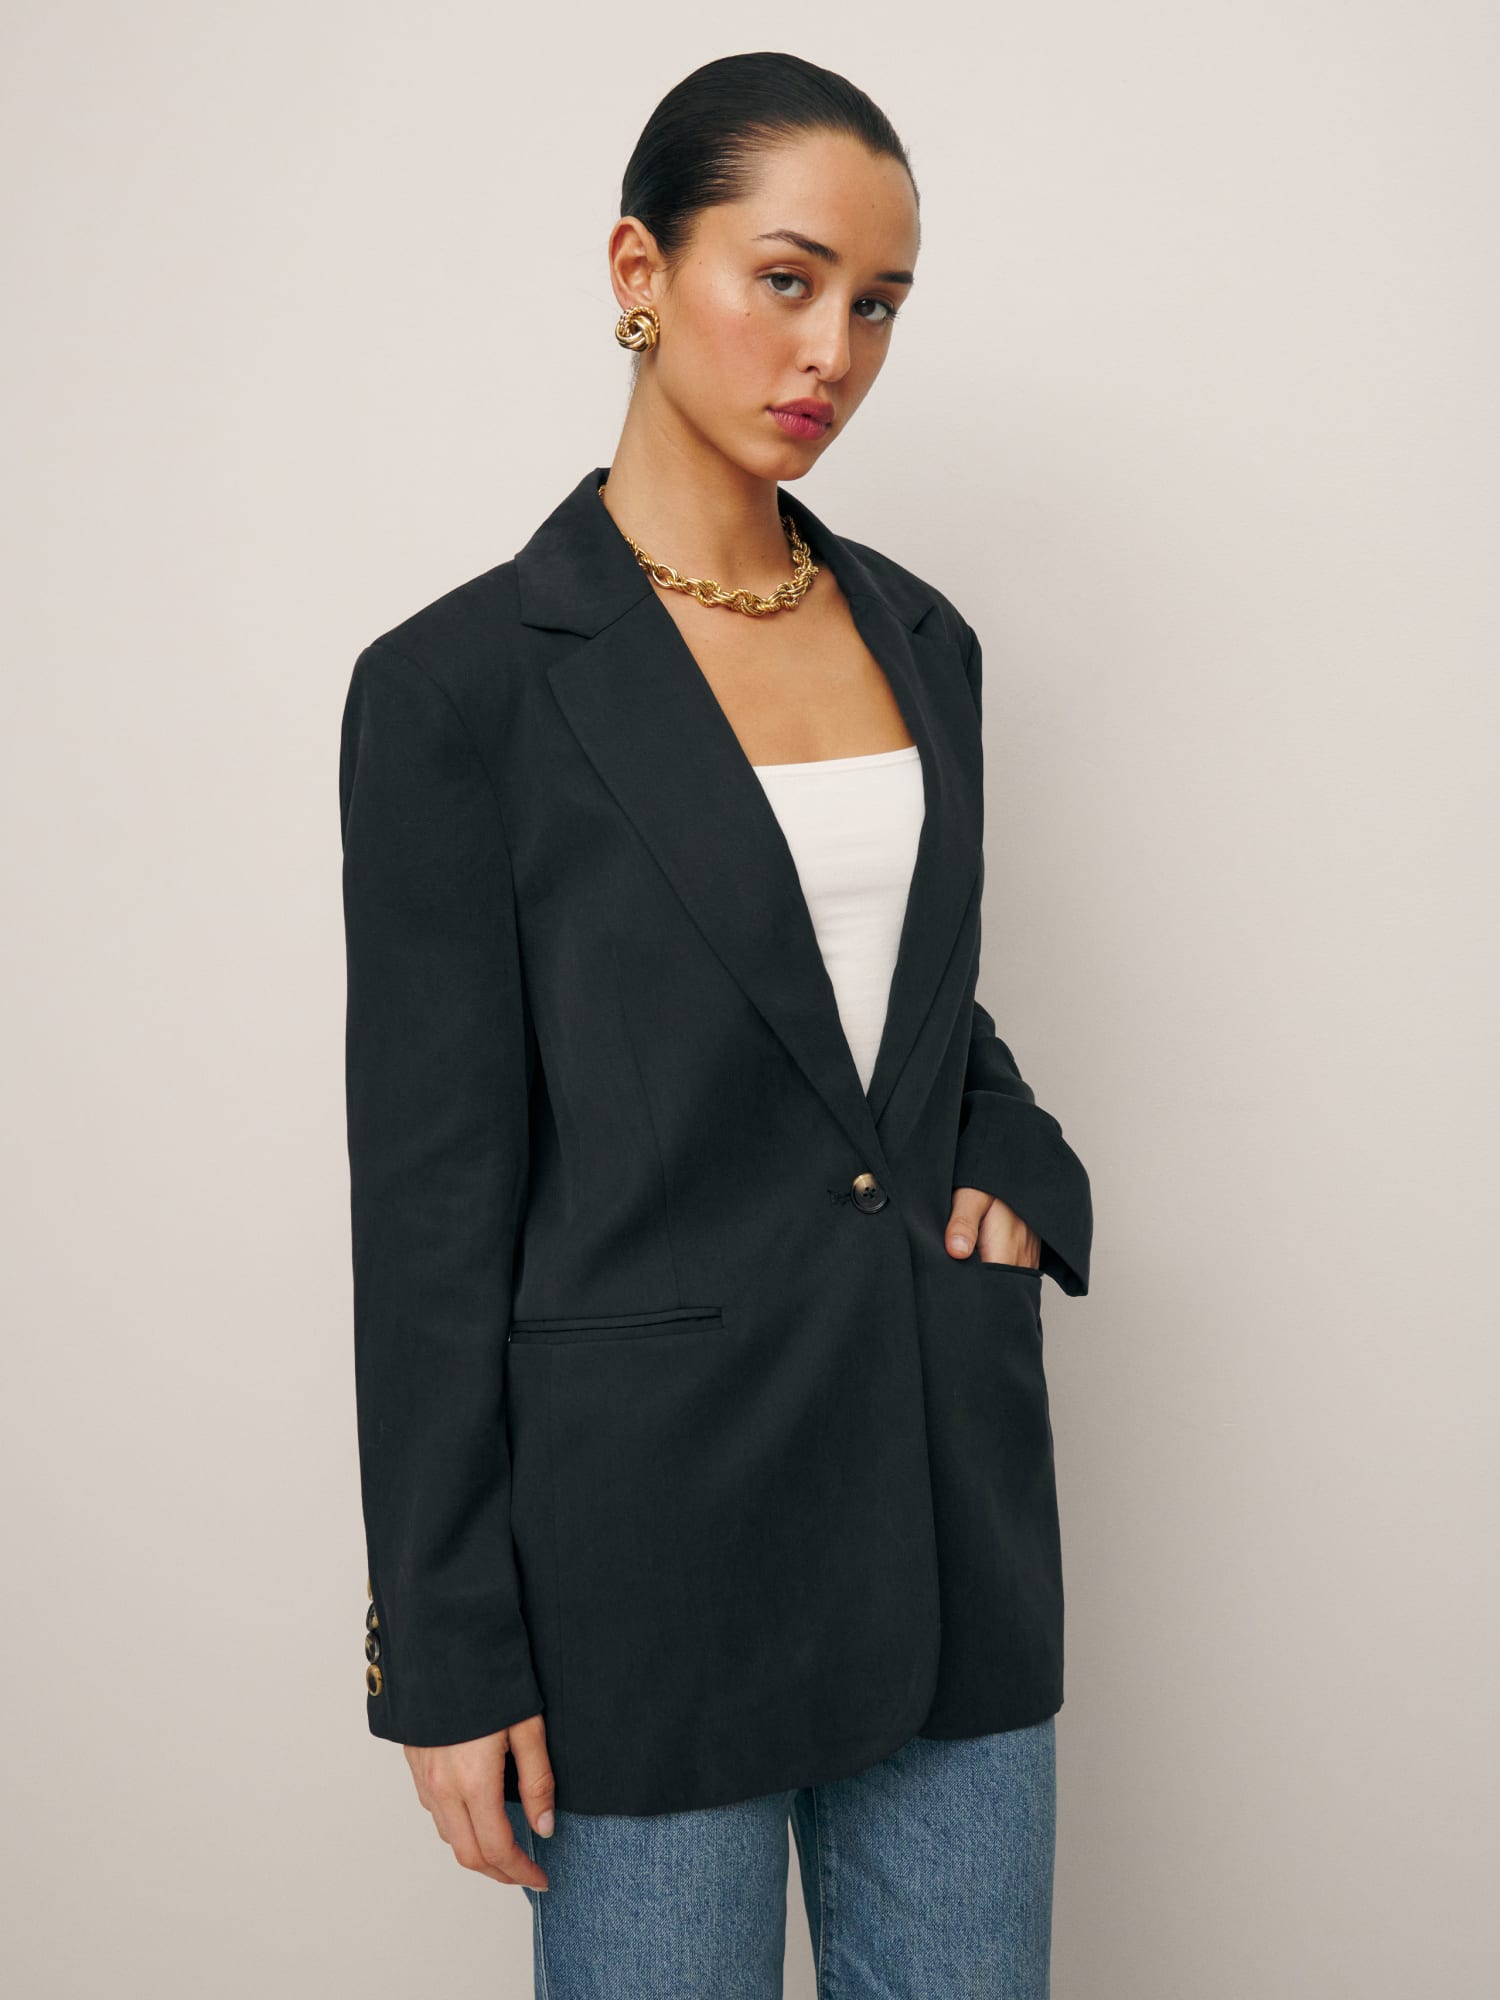 Women's Relaxed Fit Essential Blazer - A New Day™ Black XS